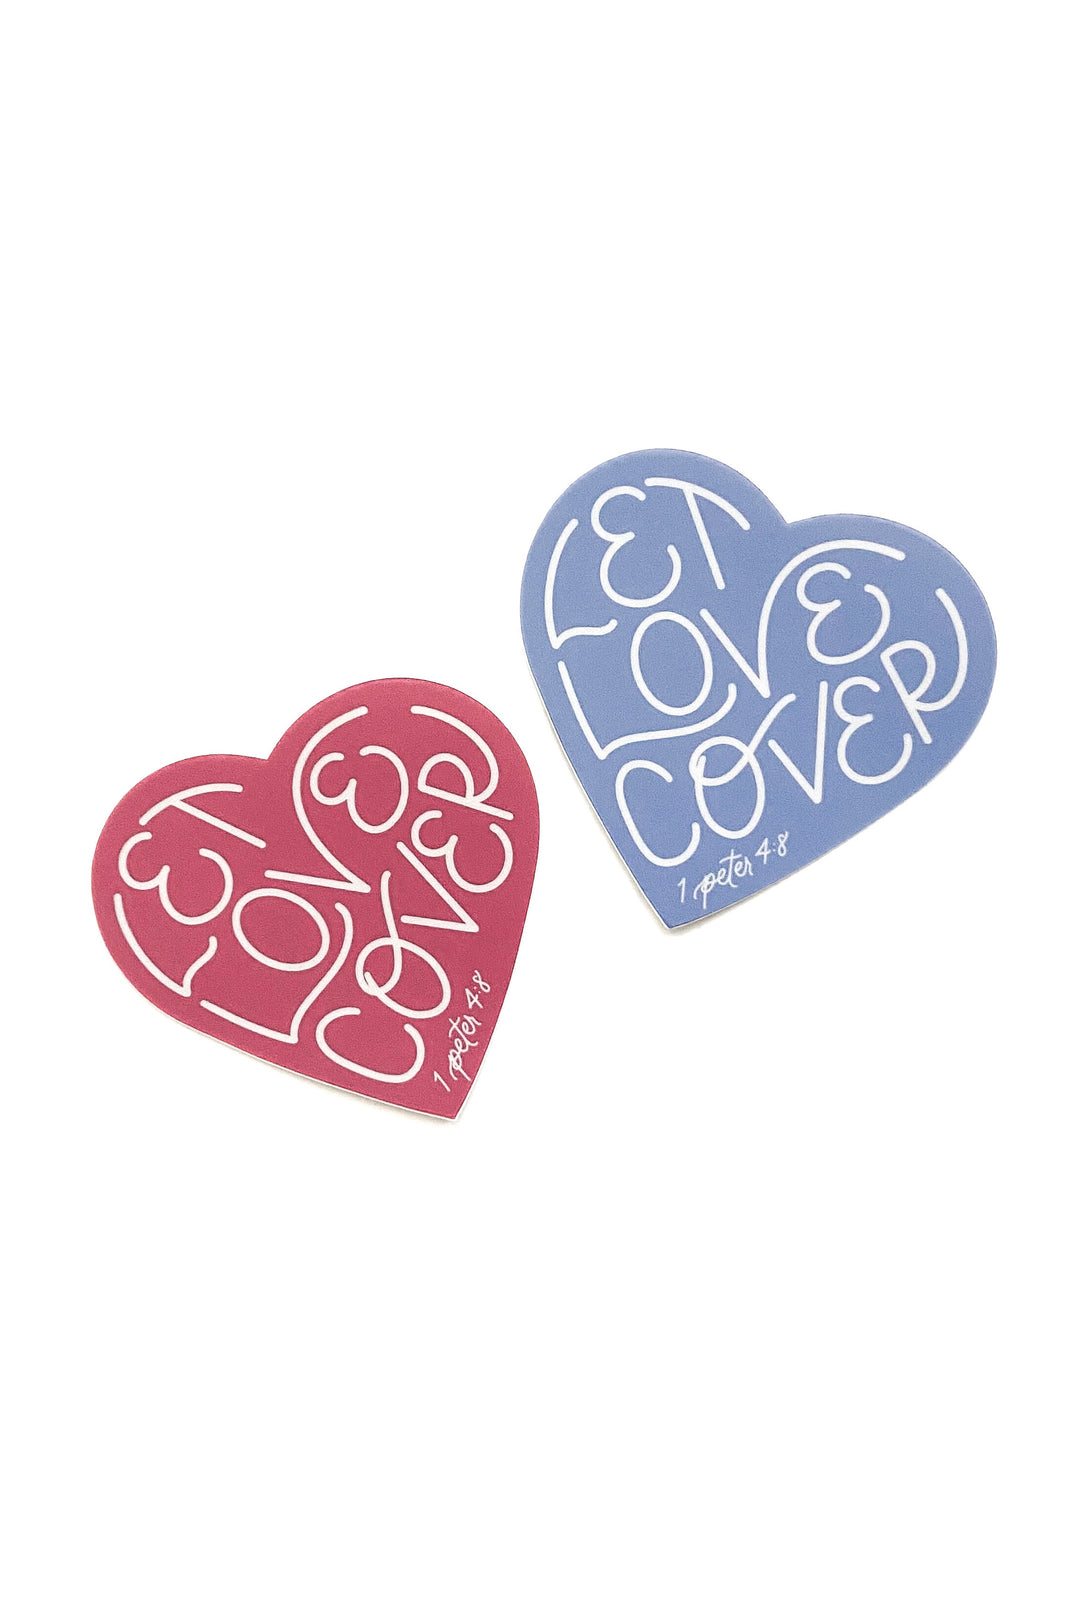 “Let Love Cover” Sticker